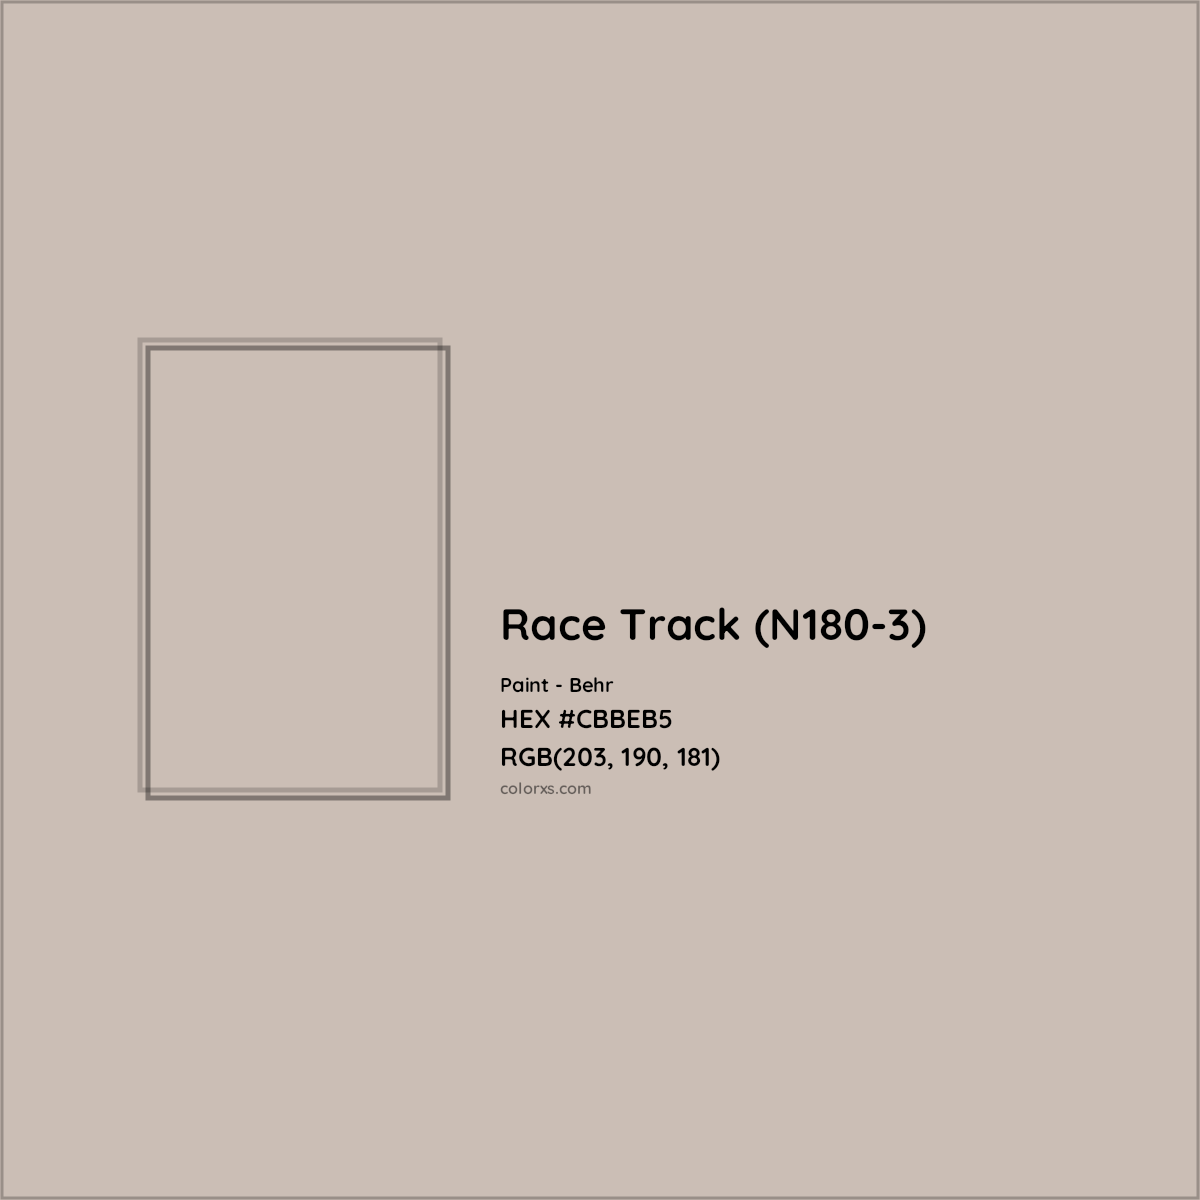 HEX #CBBEB5 Race Track (N180-3) Paint Behr - Color Code